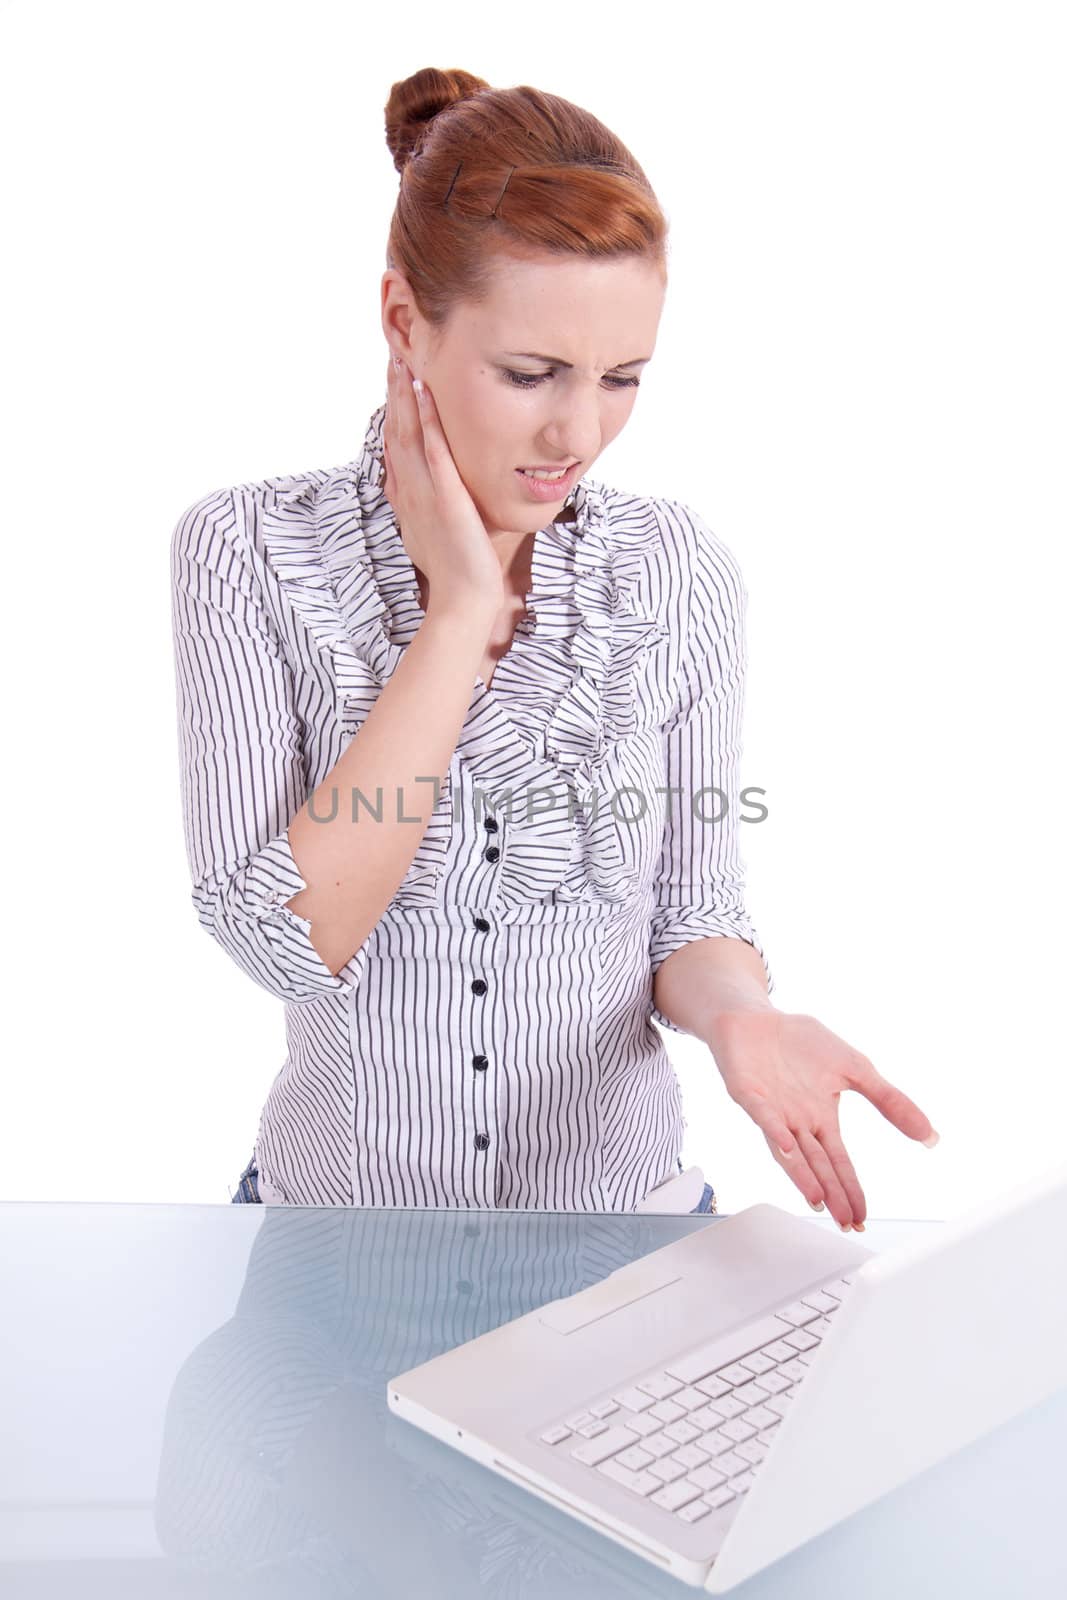 young business woman on computer with snack isolated on white